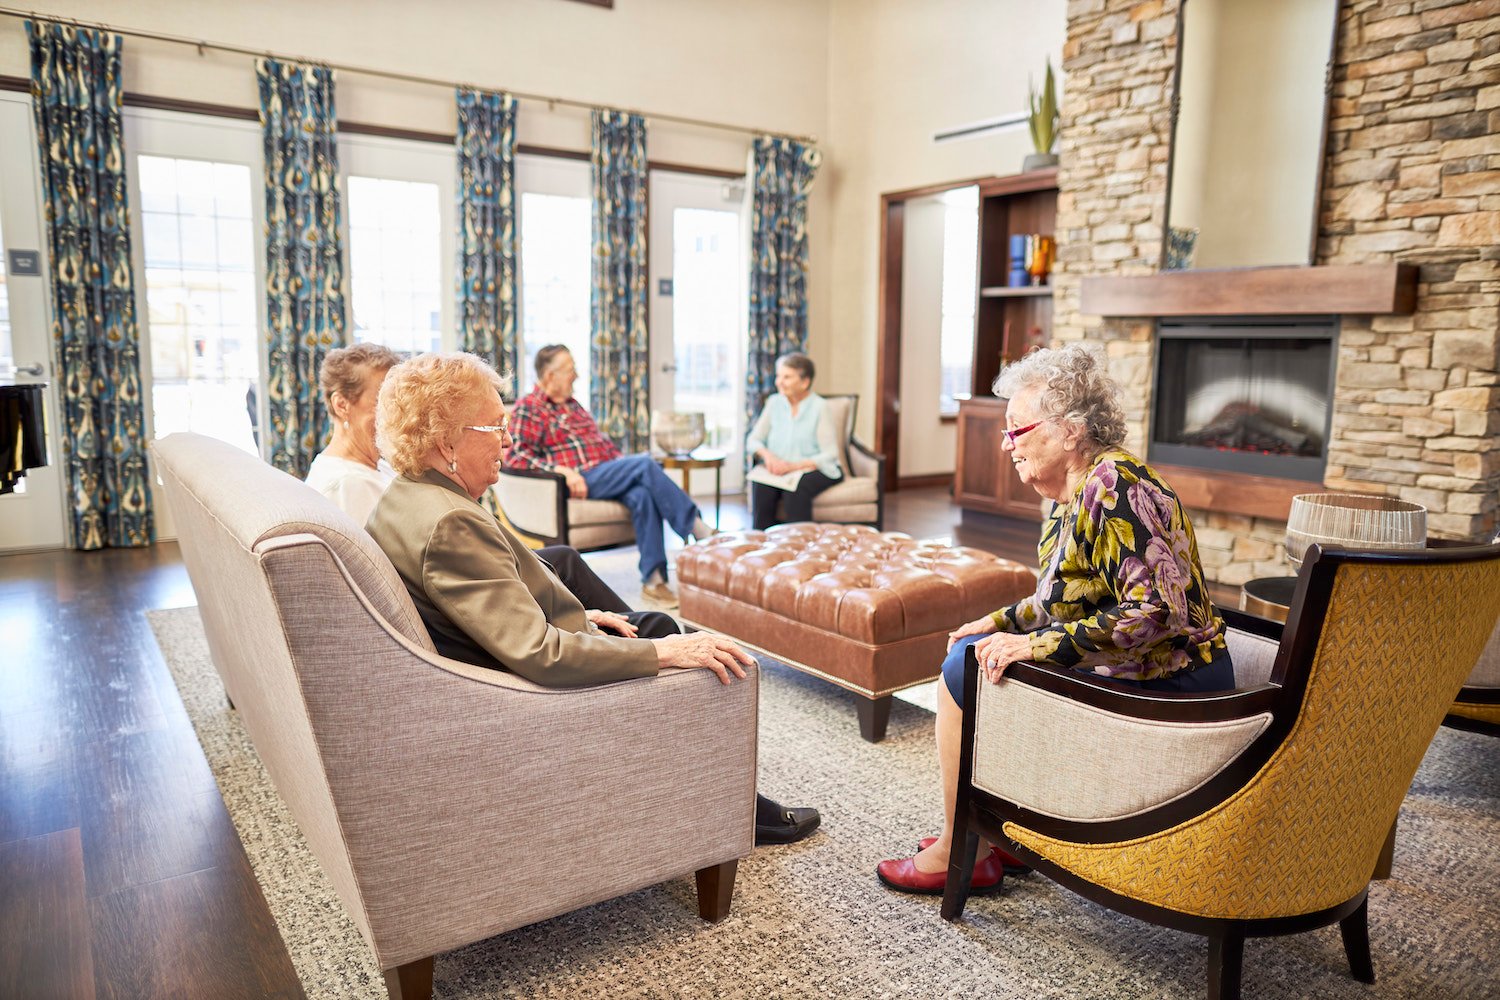 Residents laughing together in a living room